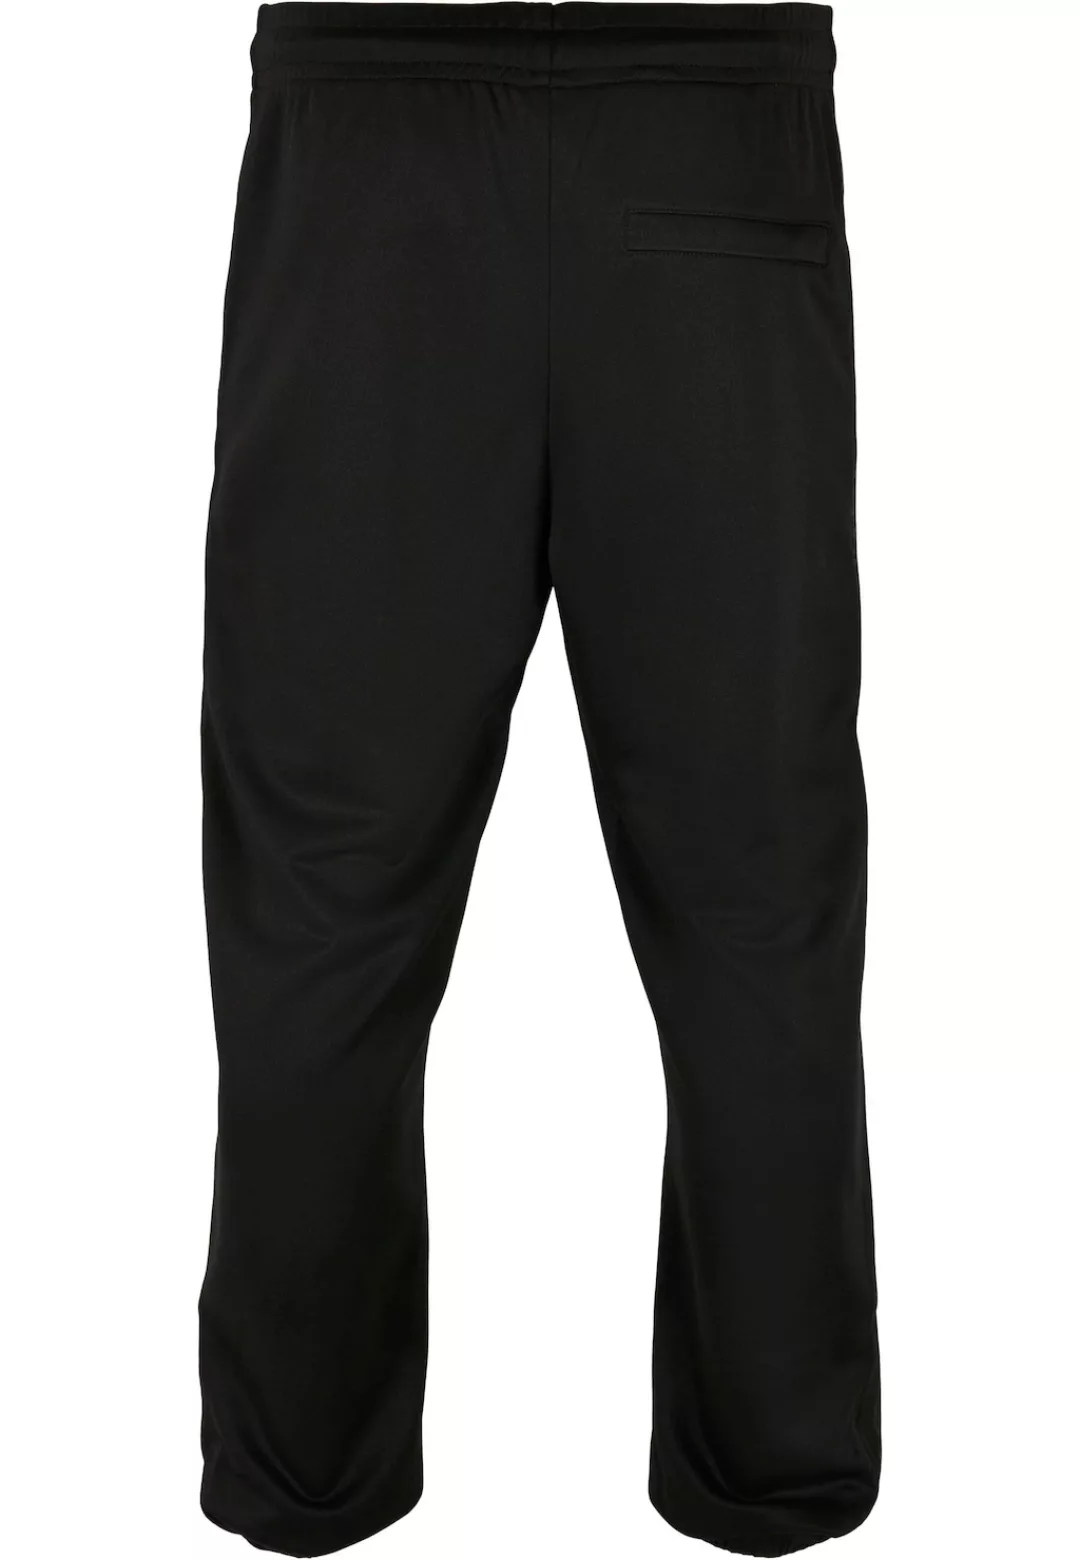 Southpole Stoffhose "Southpole Herren Southpole Tricot Pants with Tape", (1 günstig online kaufen